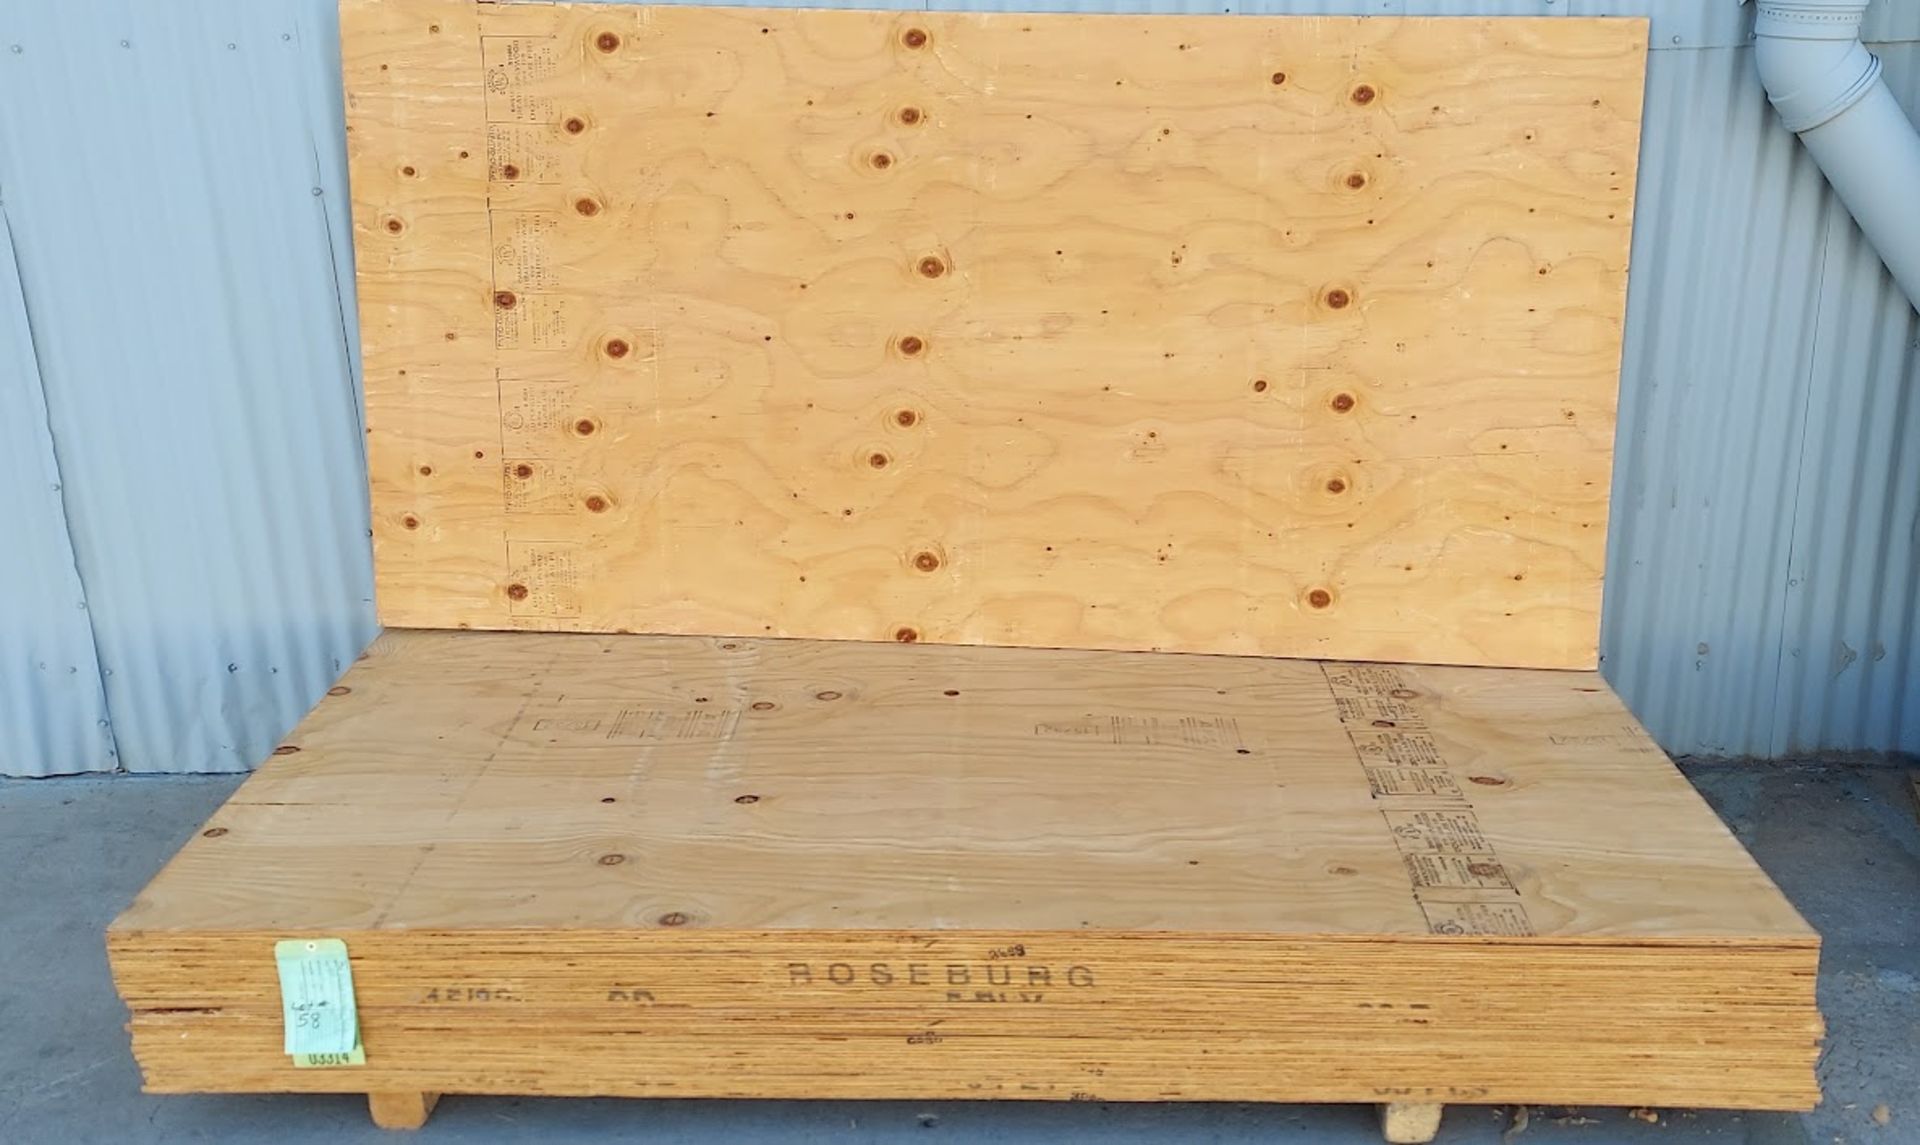 22 sheets - 15/32" Roseburg Fire Rated Sheathing Plywood, 48" x 96" Sheets - Image 4 of 6